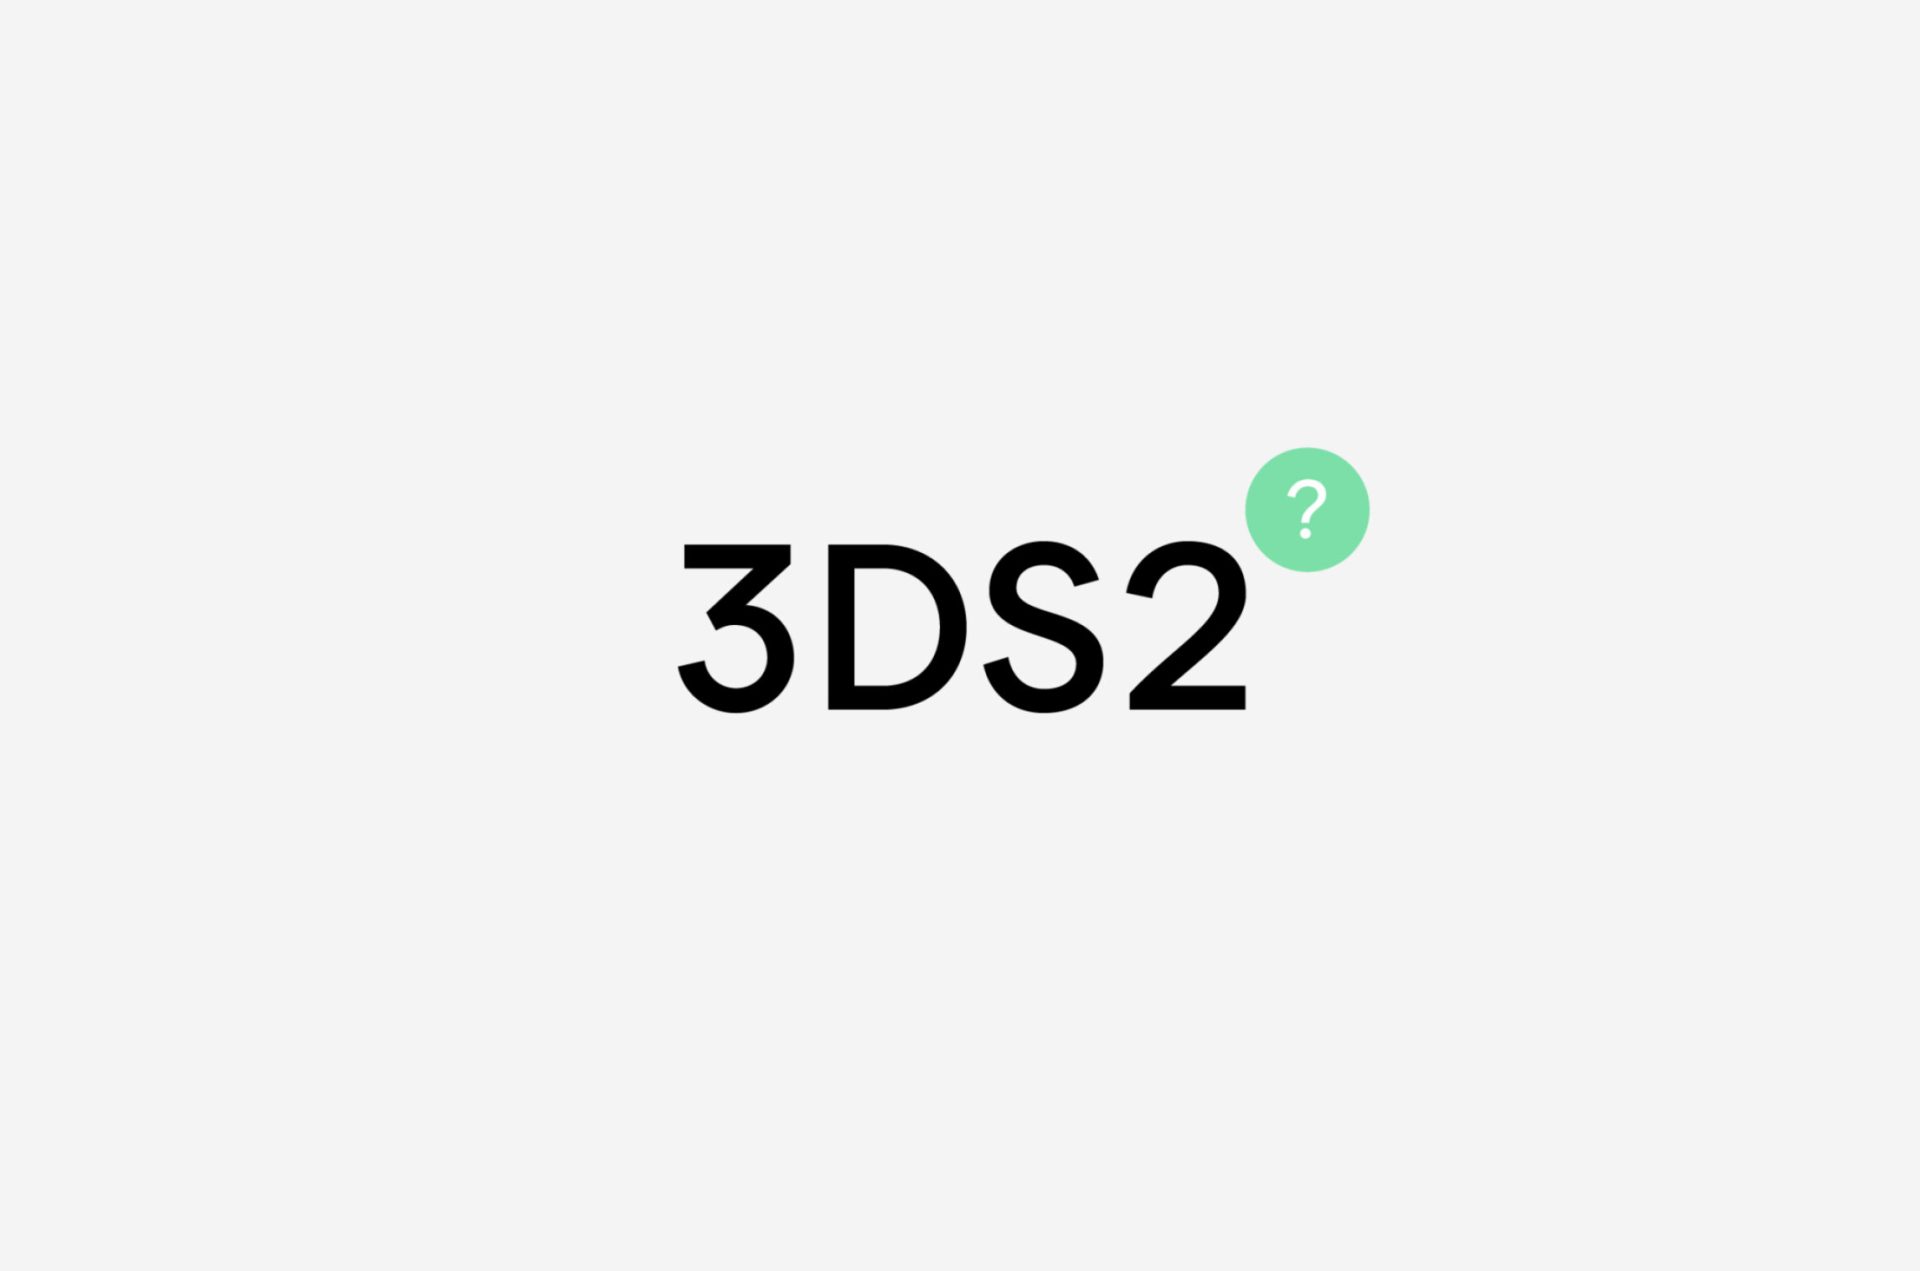 What is 3DS2?